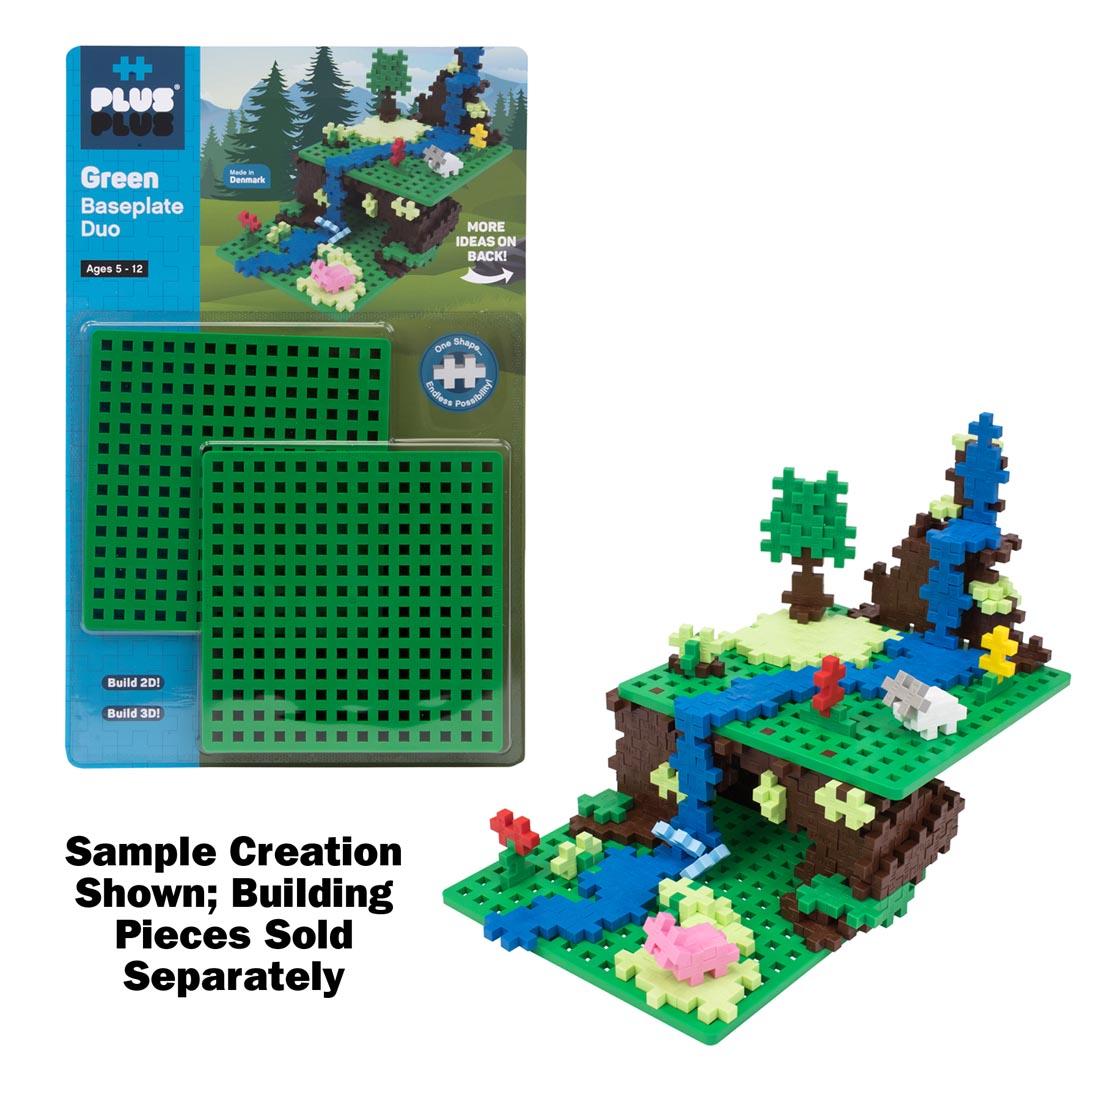 Plus-Plus Green Baseplate Duo along with a sample and the text: Sample Creation Shown; Building Pieces Sold Separately